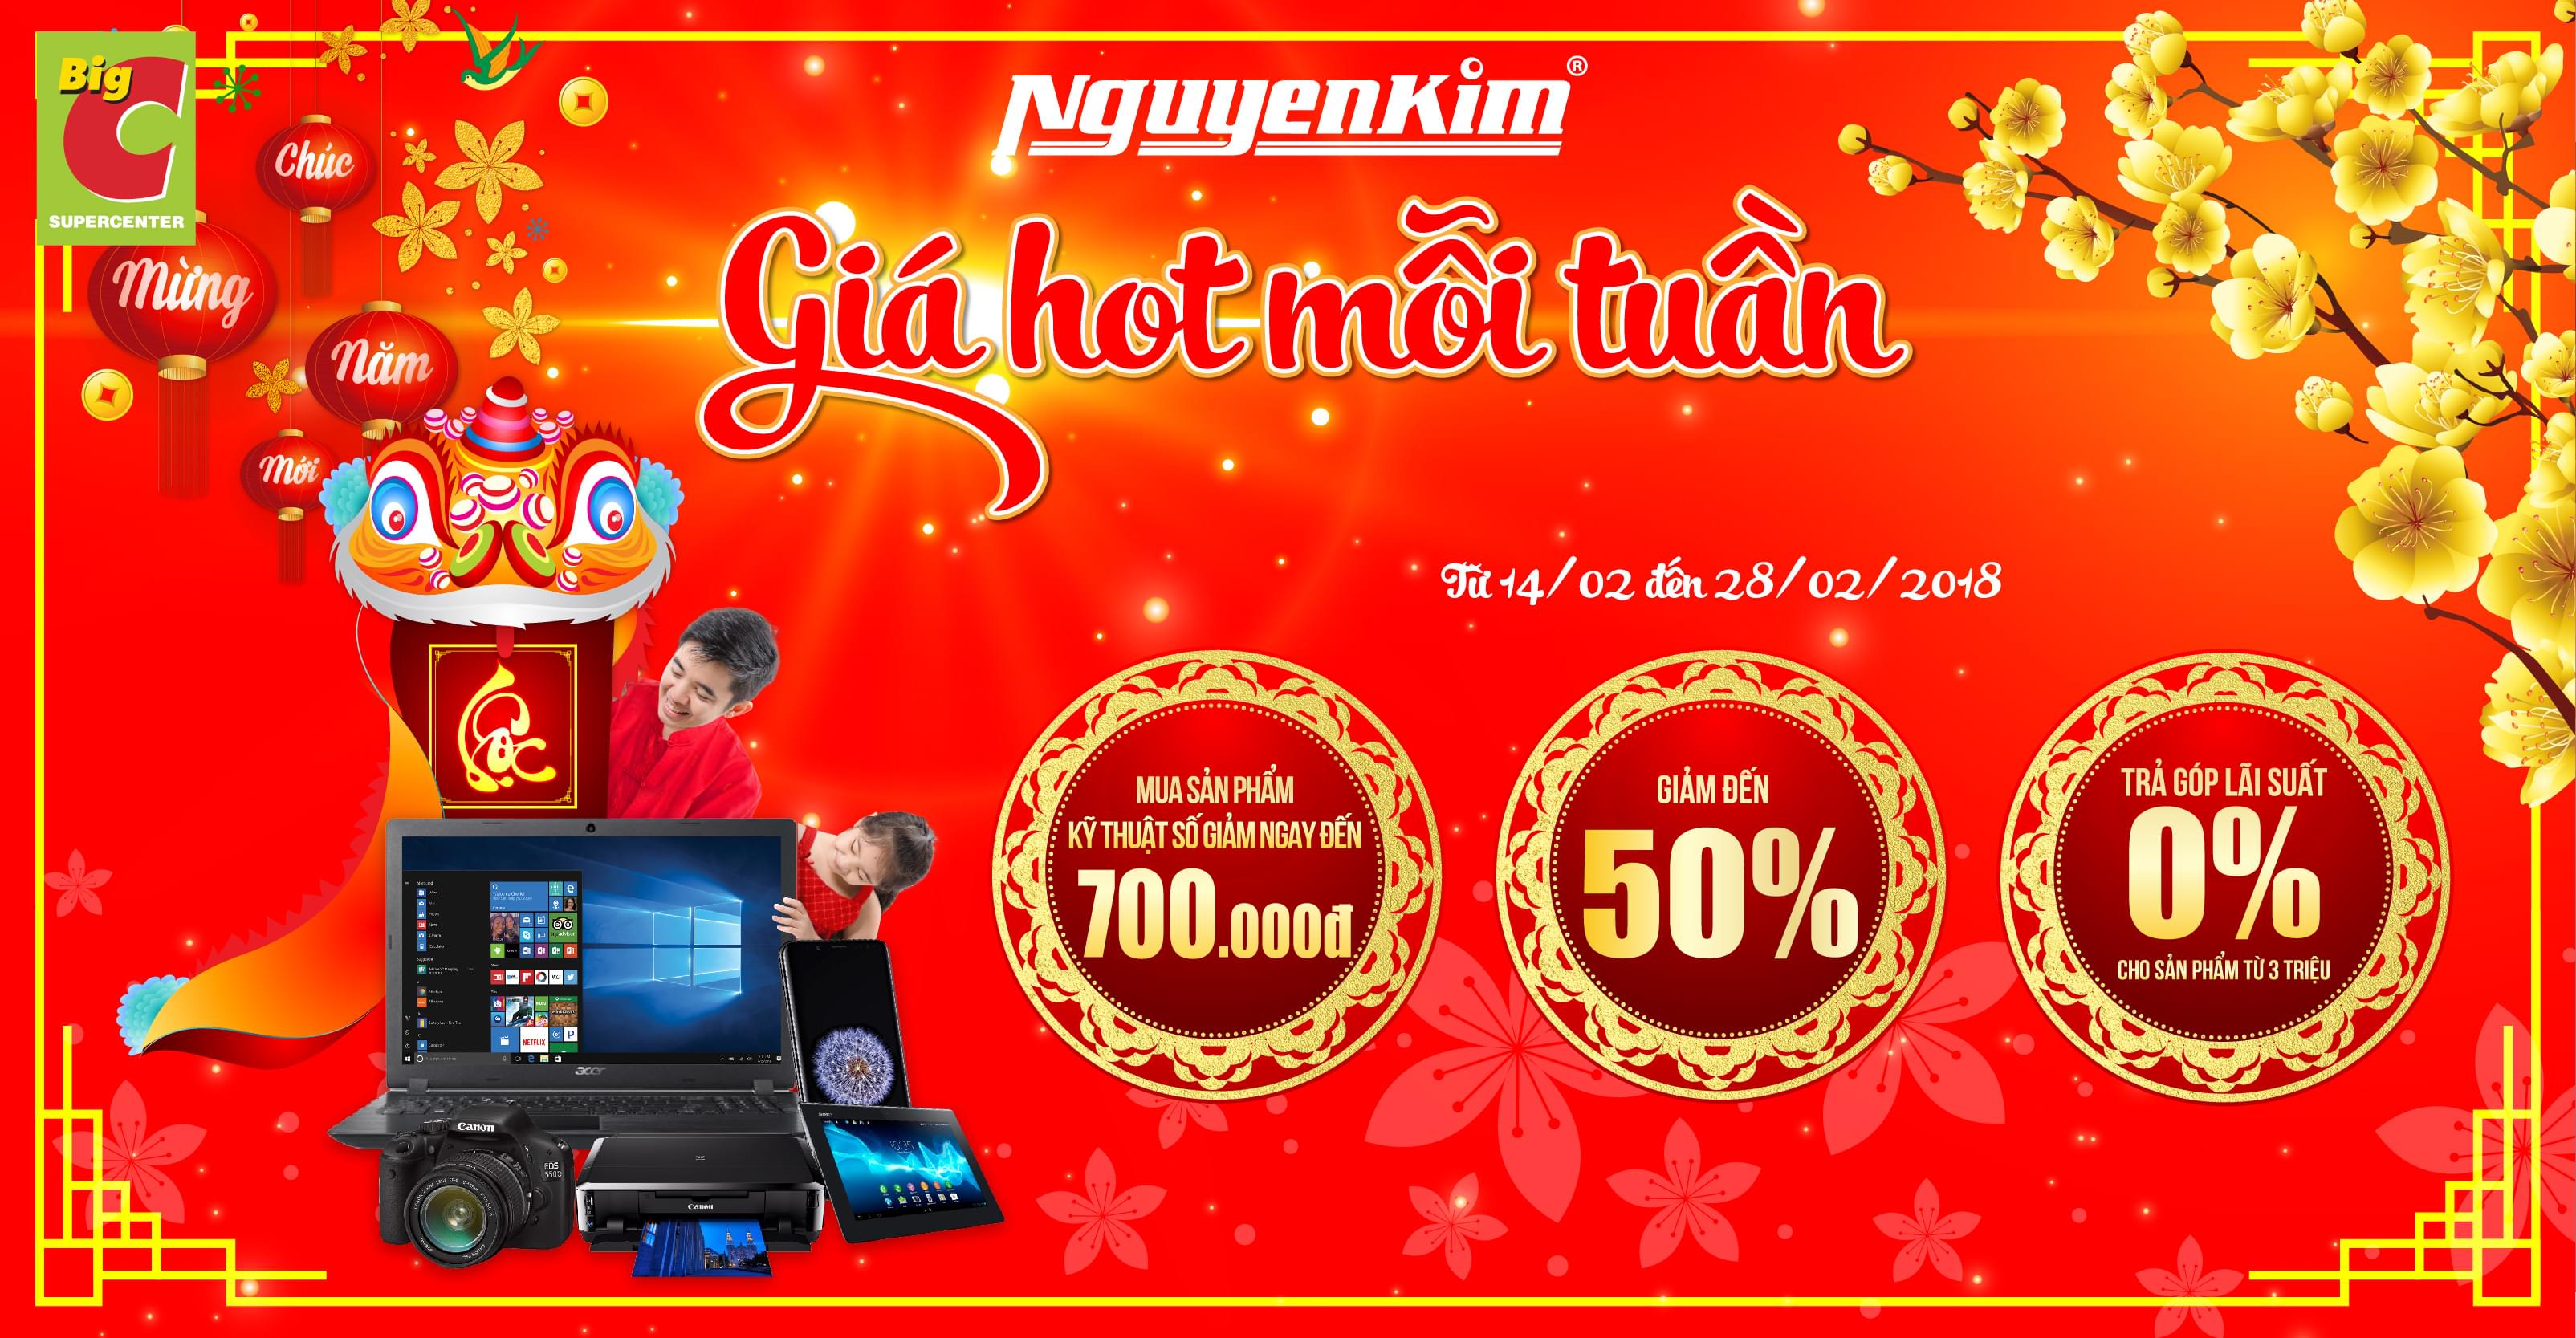 Nguyen Kim promotion at Big C – Weekly hot prices